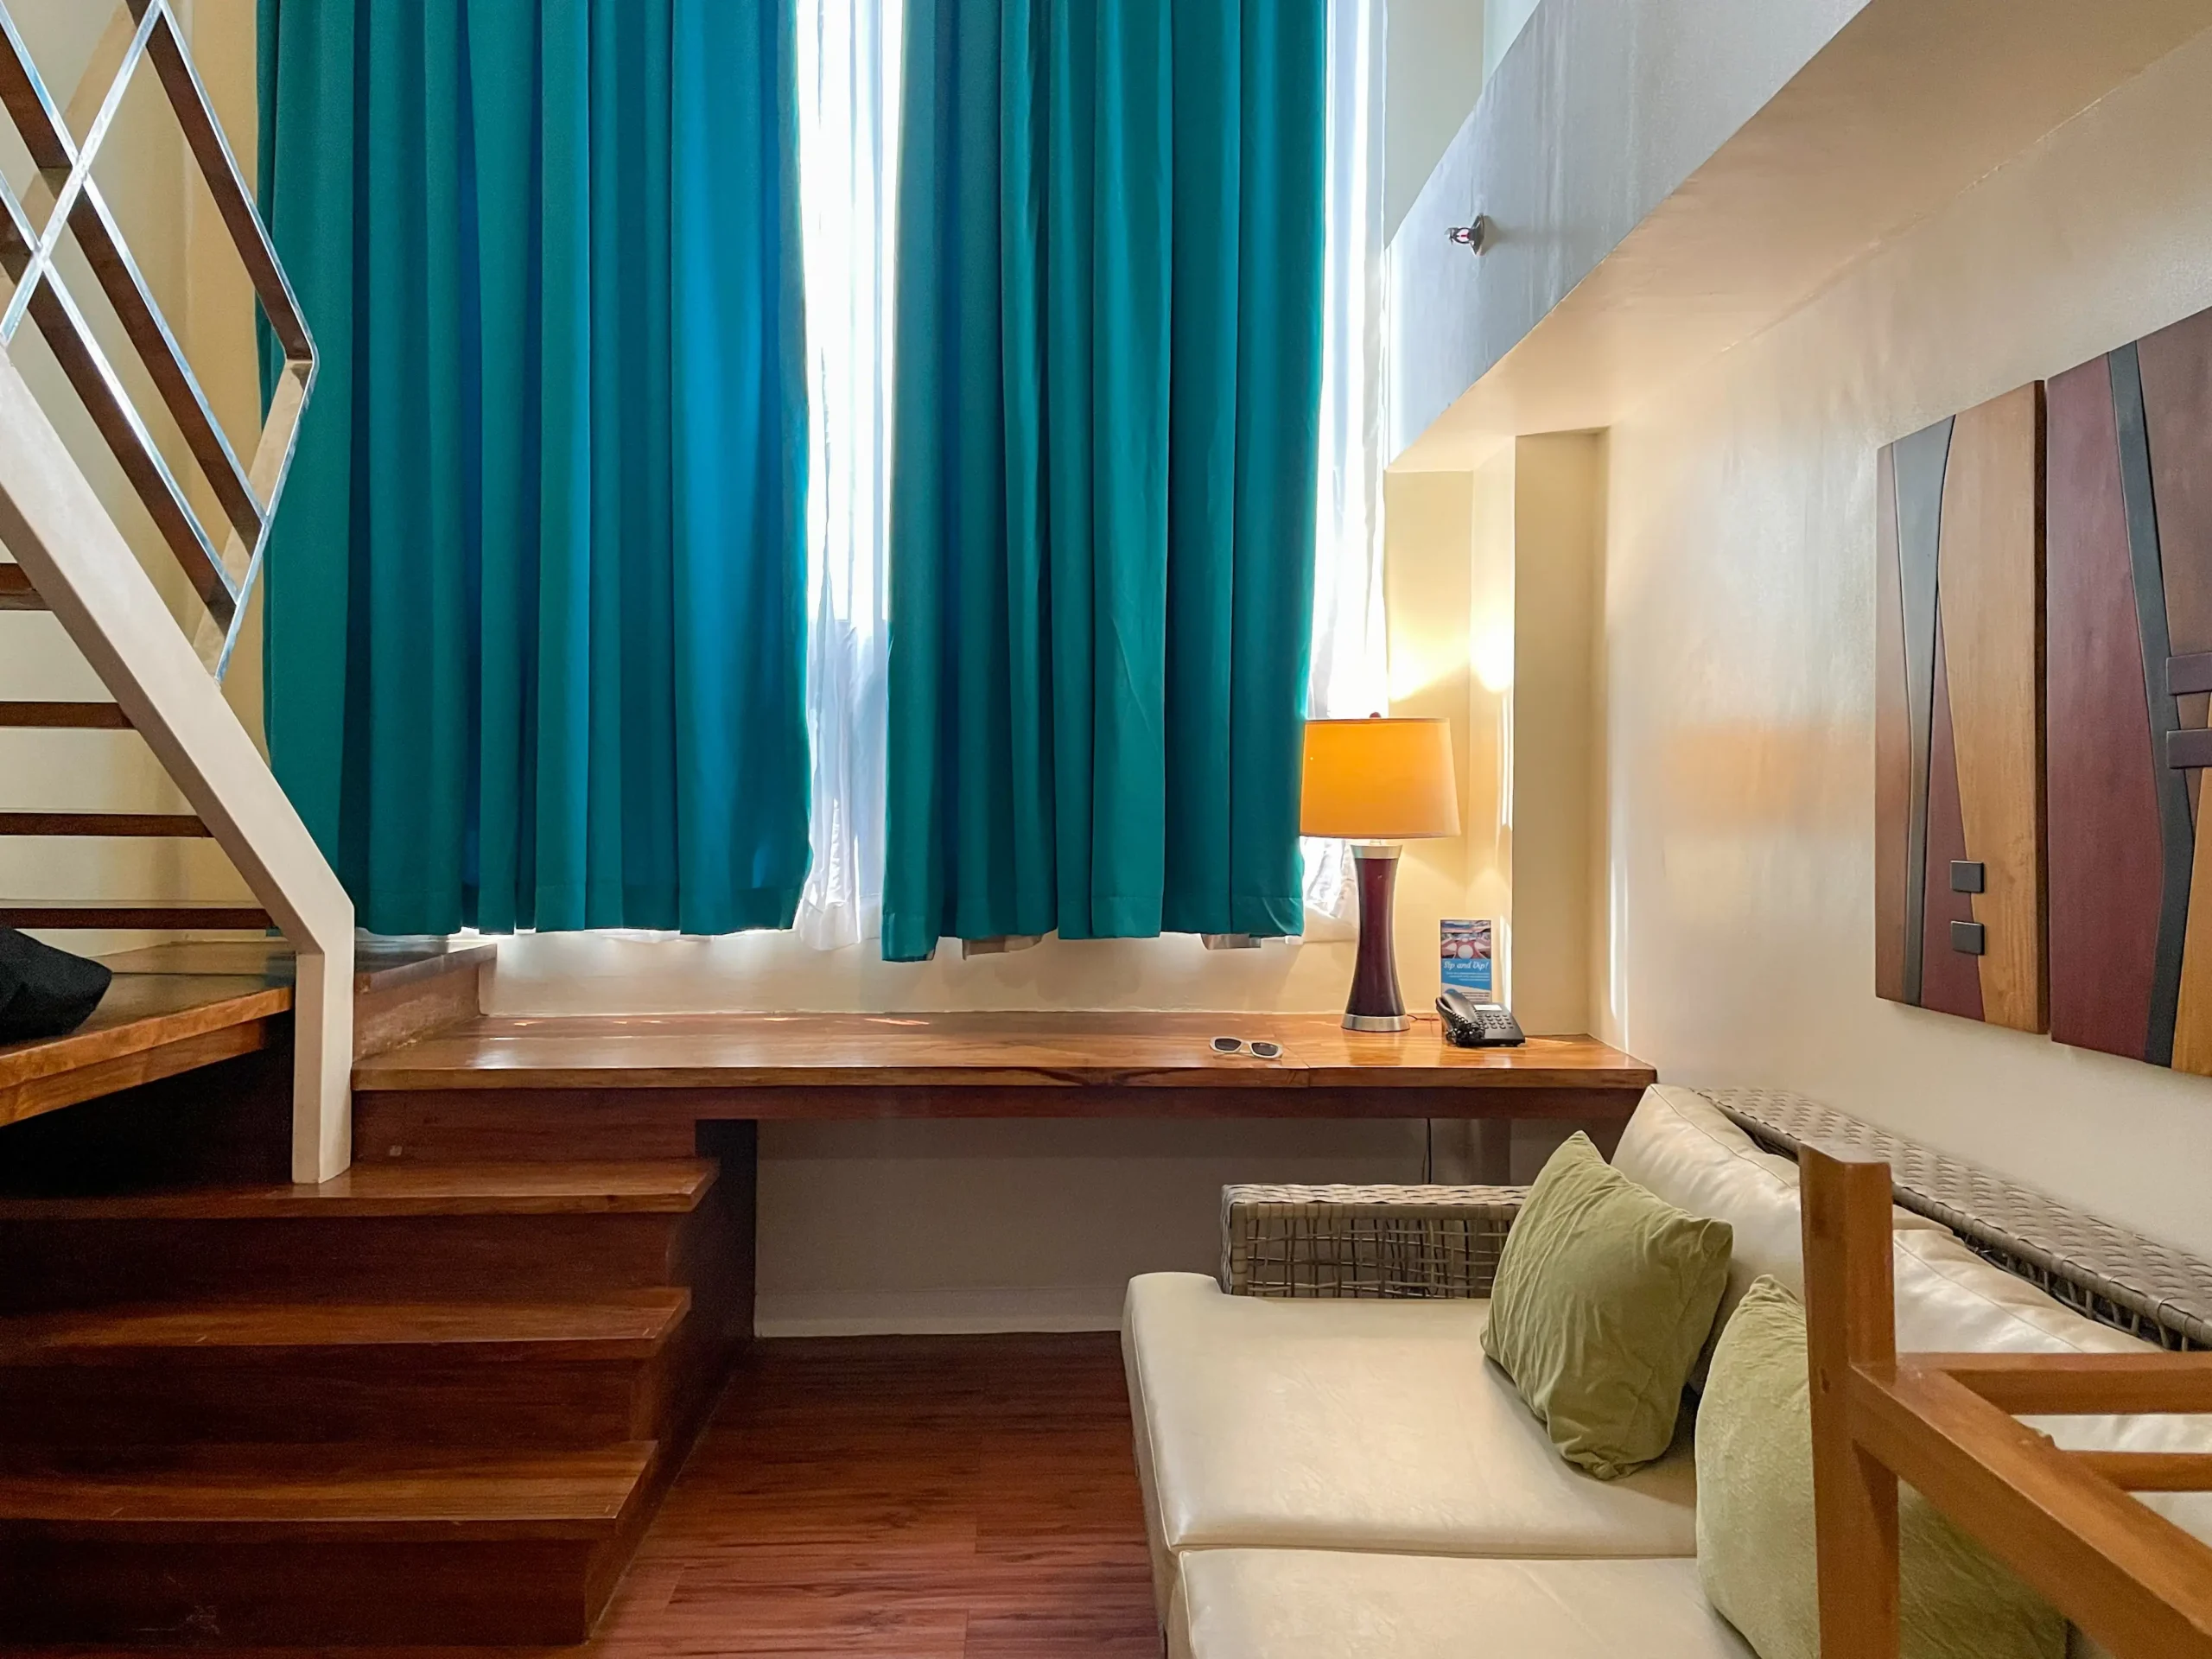 Cozy corner of a suite in Ferra Hotel and Garden Suites in Boracay with a two-level seating area, hardwood floors, and vibrant teal curtains.